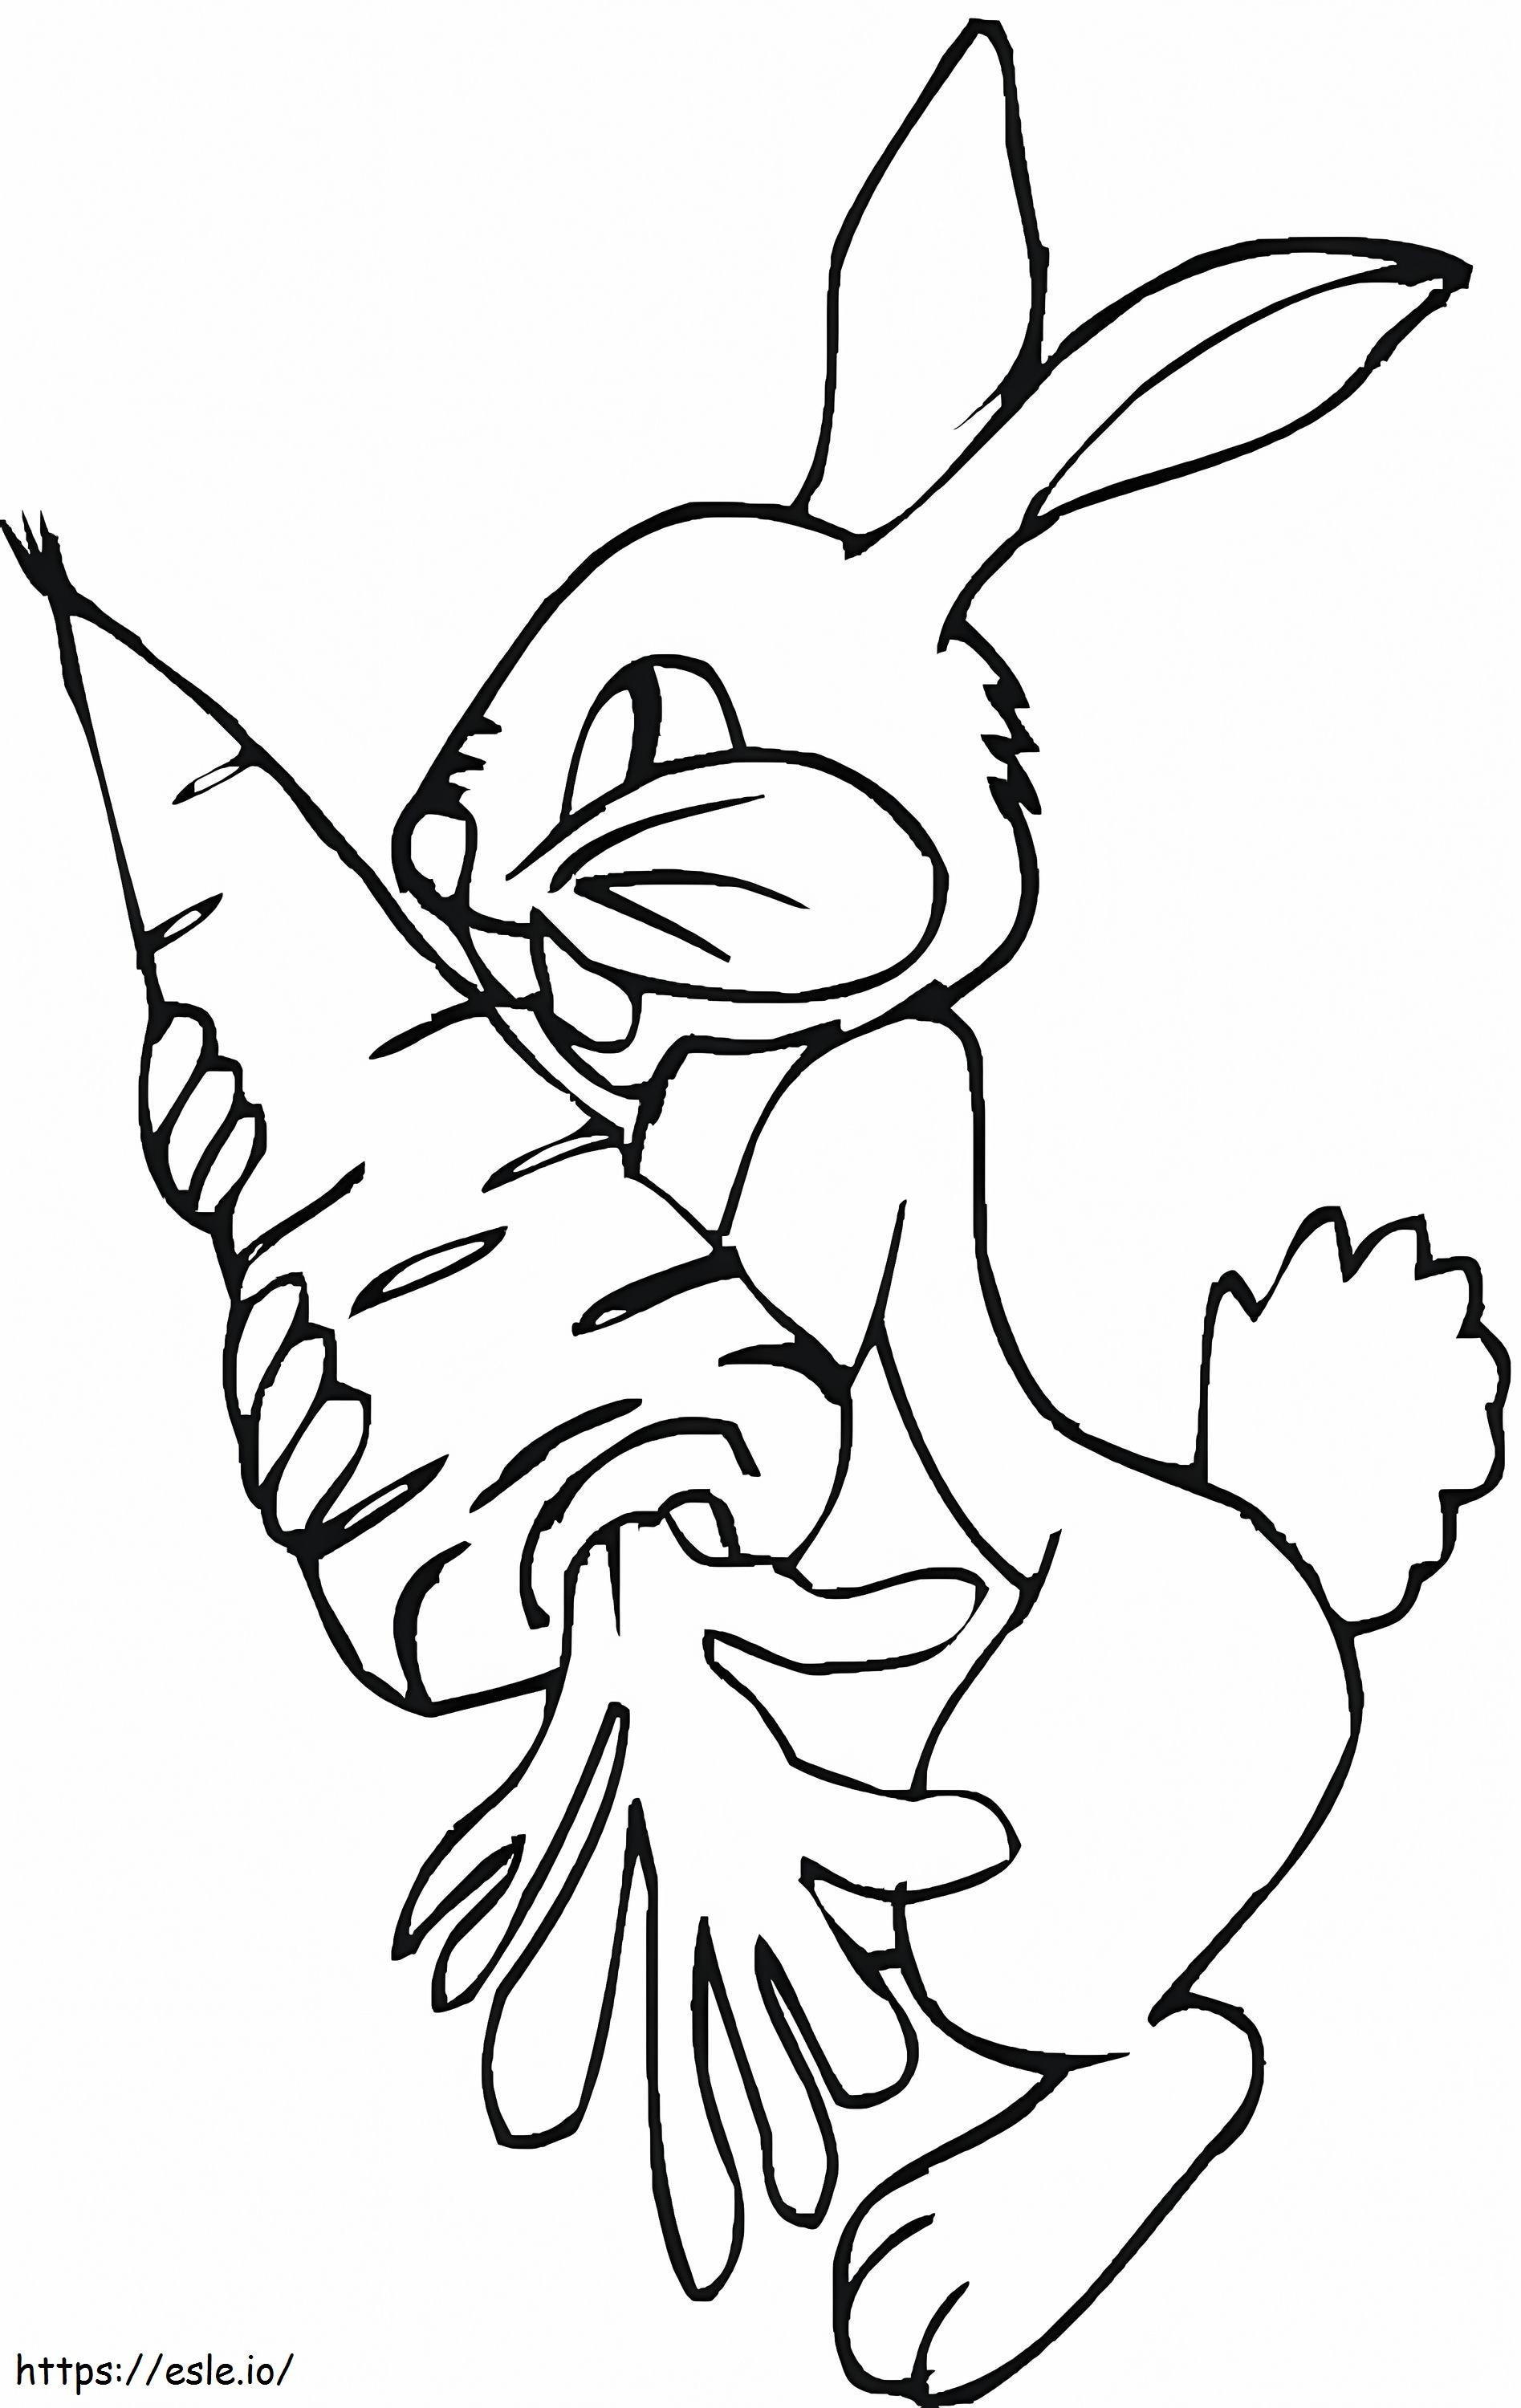 Rabbit Holds Carrot coloring page